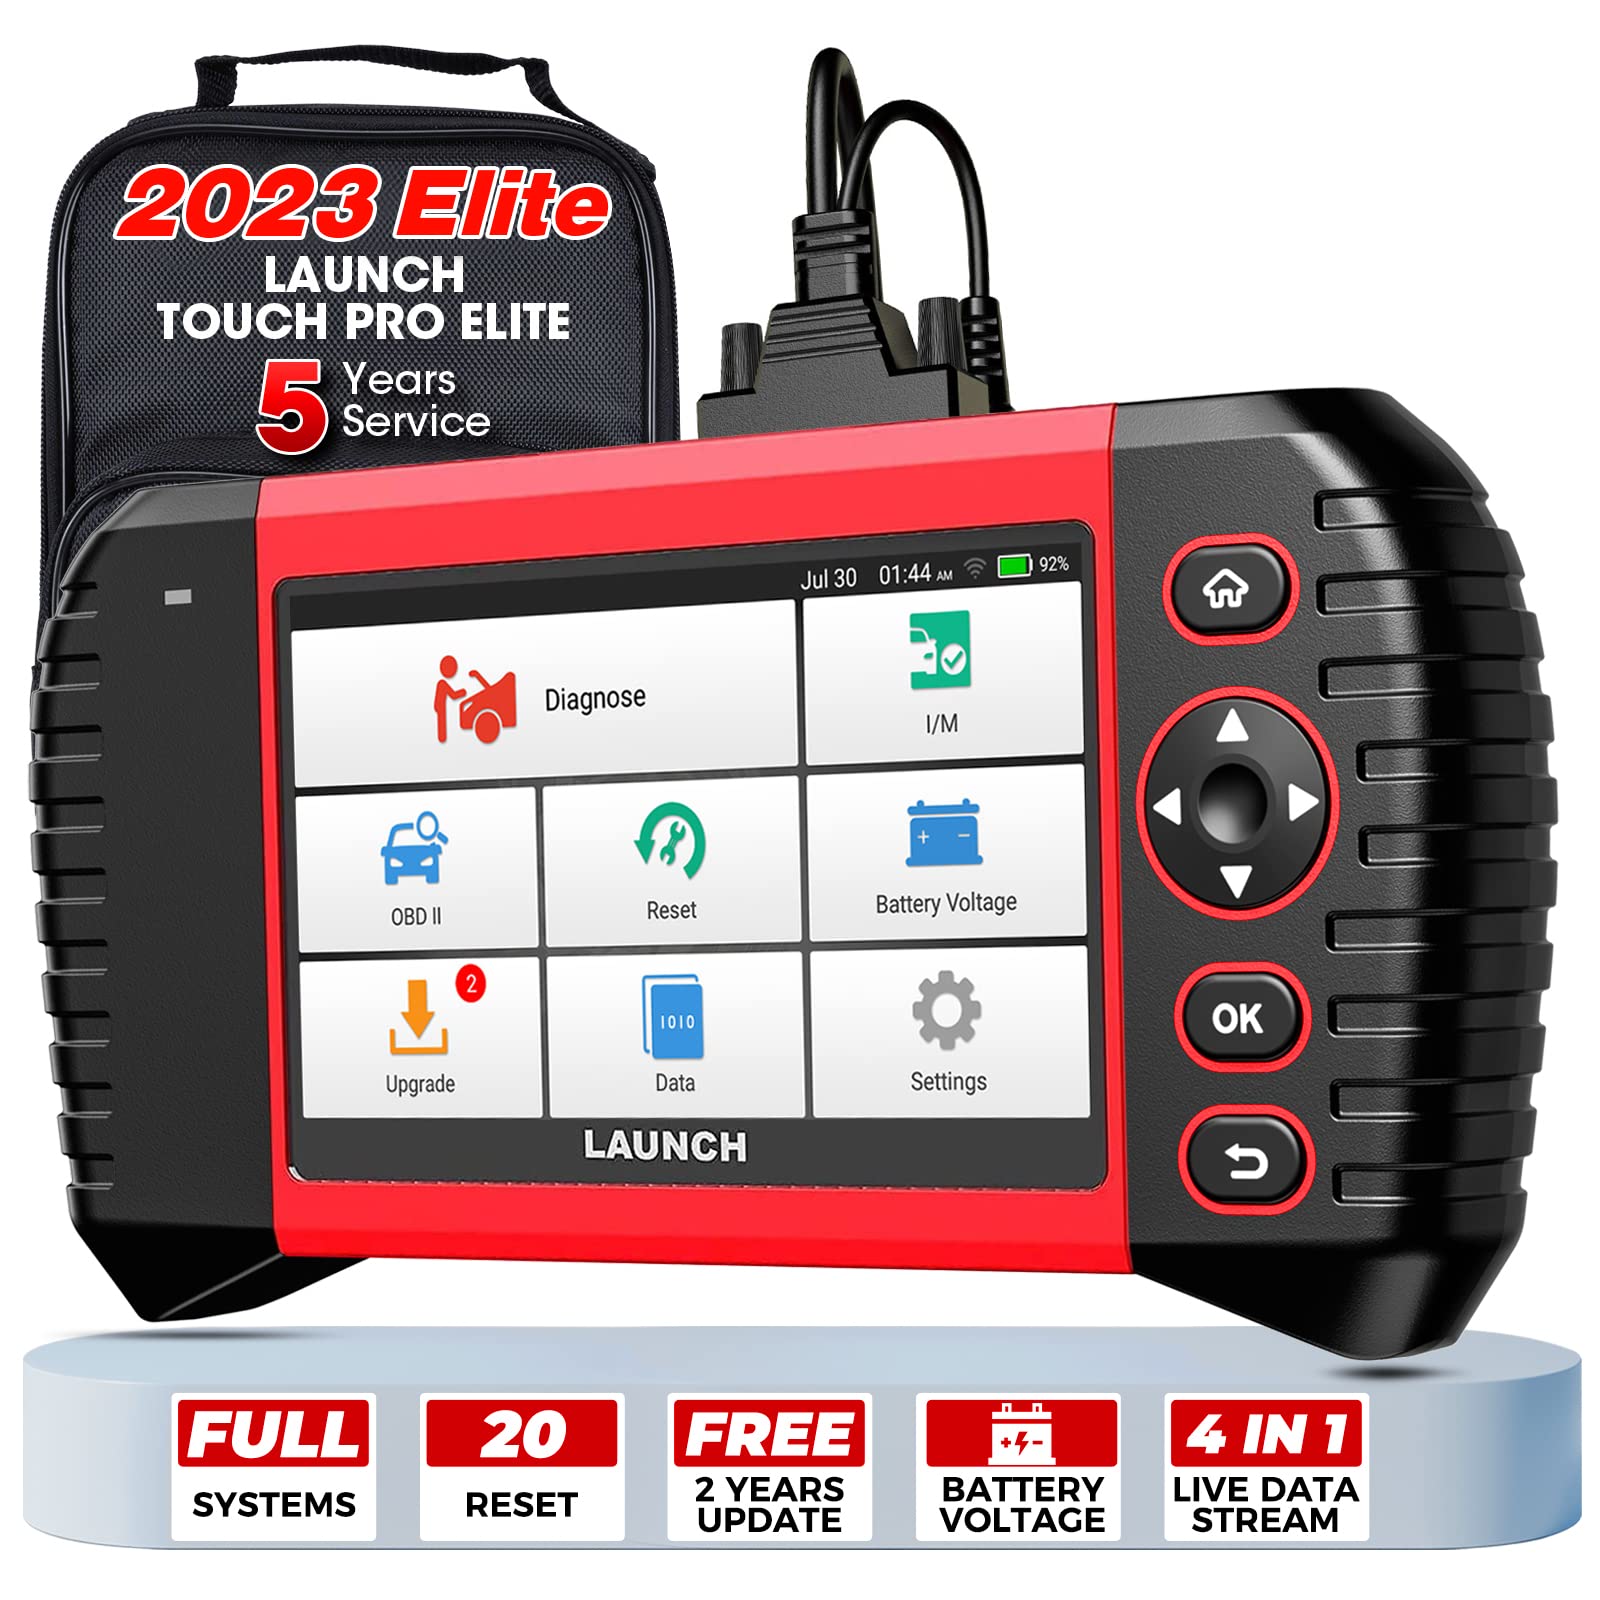 LAUNCH OBD2 Scanner Touch PRO Elite- 2023 New Scan Tool with 20 Resets Injector Coding SAS EBP BMS ABS B leeding Throttle Adaptation Car Scanner,All System Diagnostic Tool,Auto VIN,Free Update